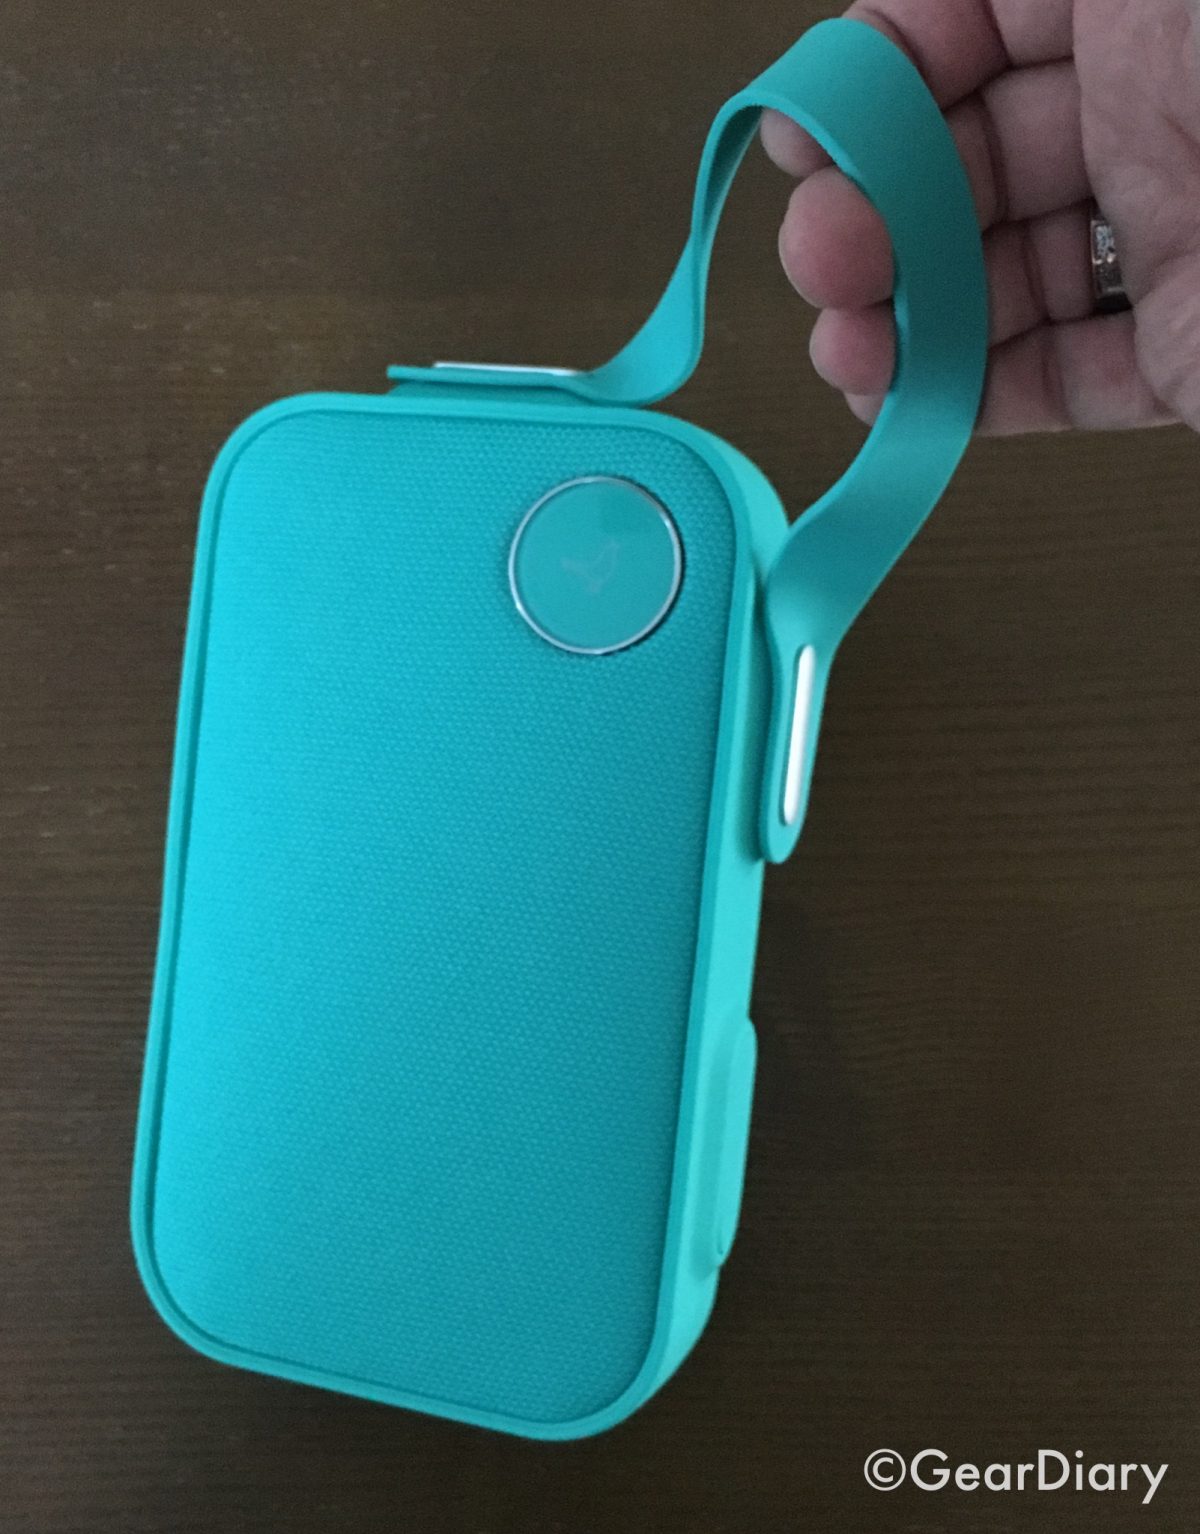 You'll Snap Your Fingers for the Libratone ONE Click Portable Speaker